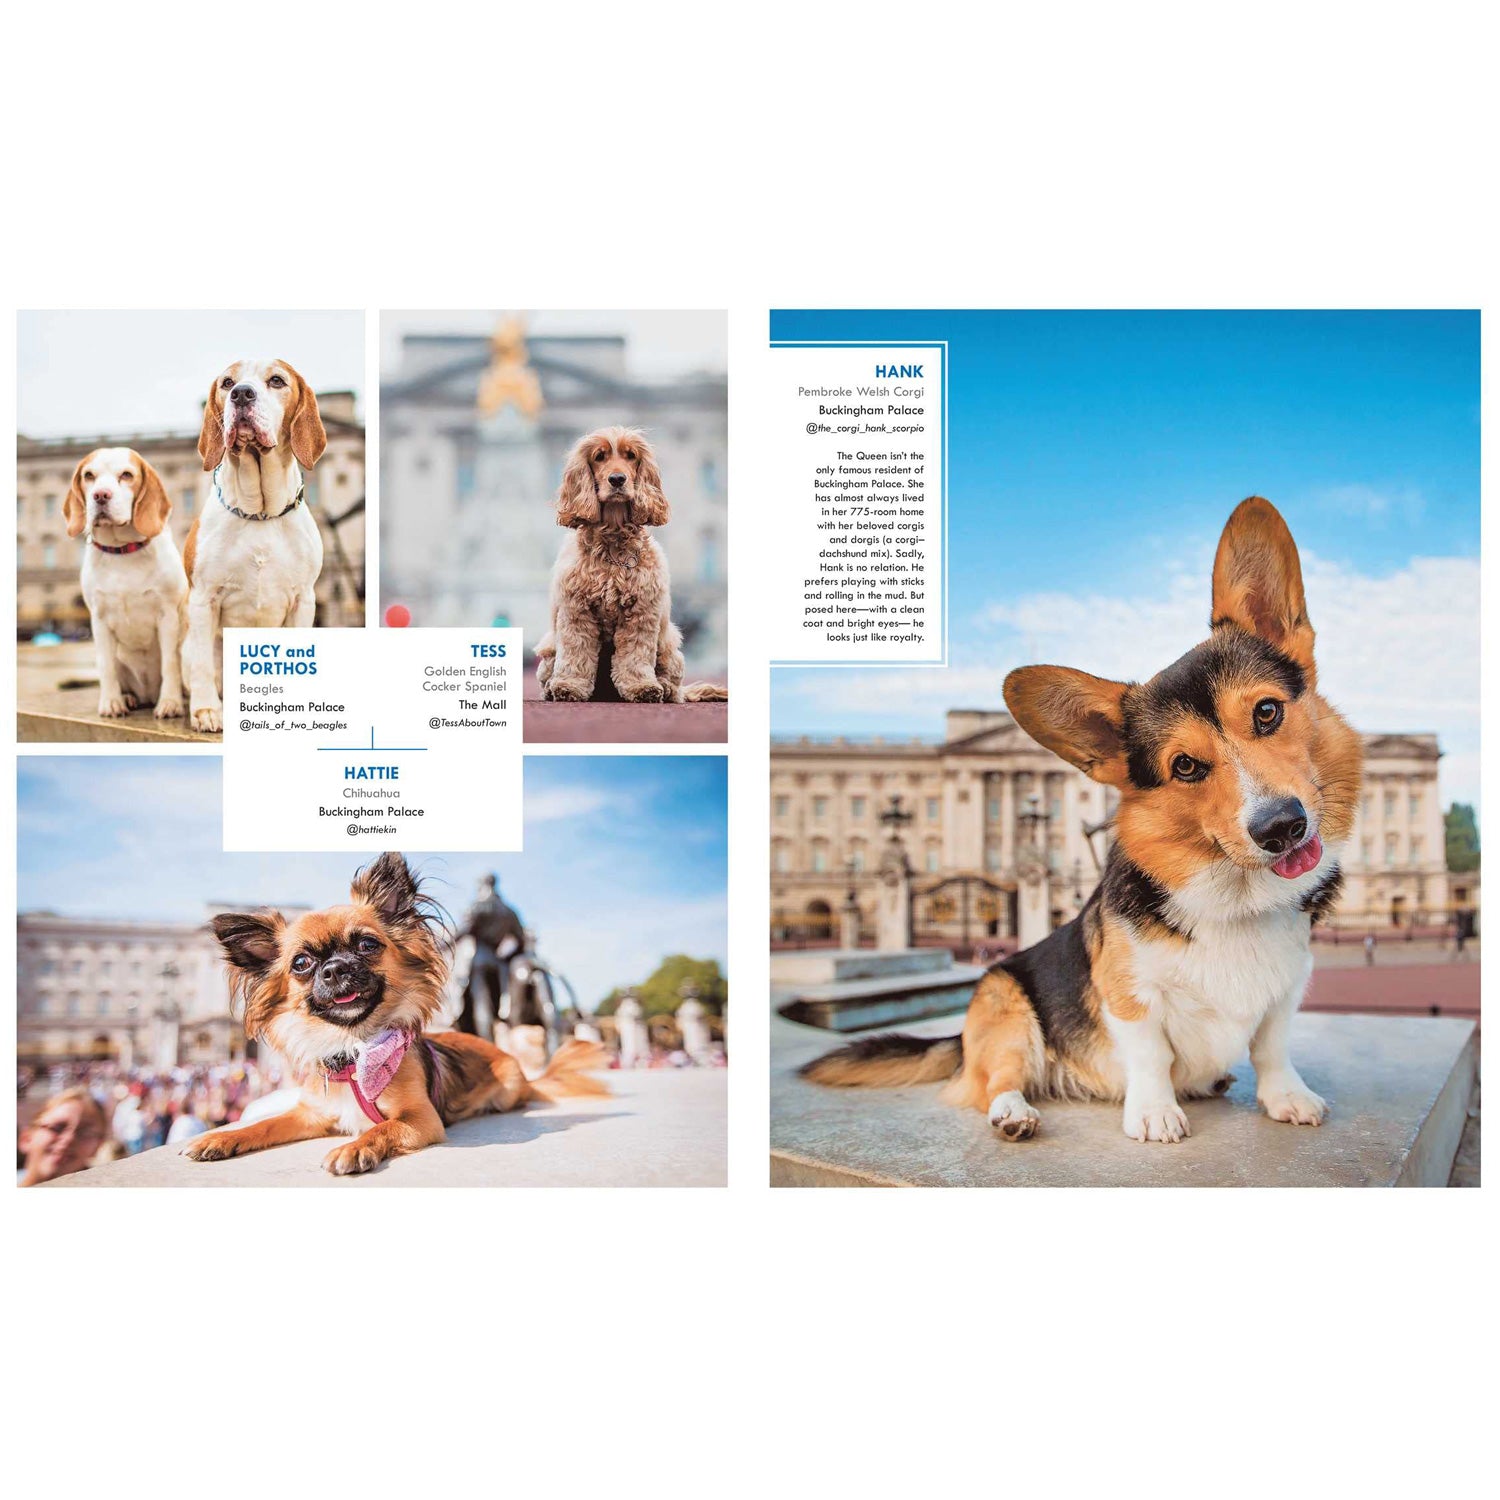 Canines of London Book by Bridget Davey 2